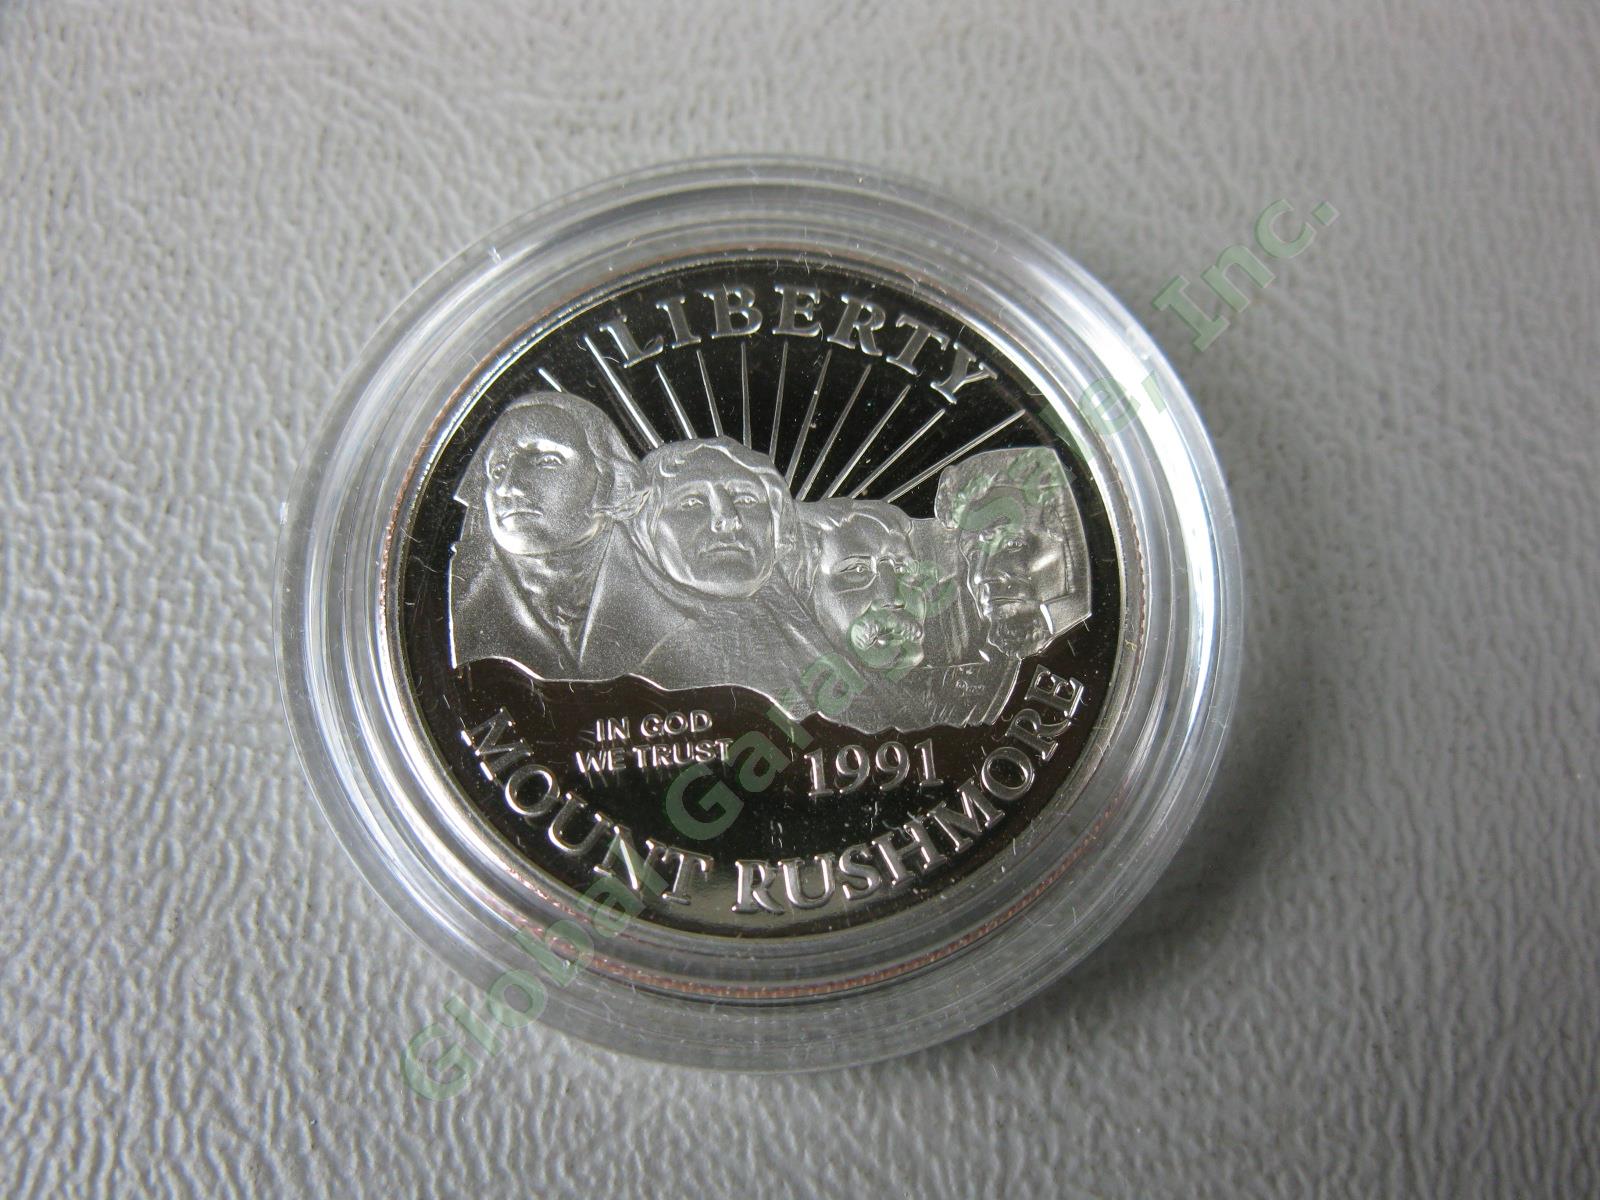 1991 US Mint Mount Rushmore 50th Anniversary 3-Coin UC Proof Set $5 Gold Silver 6